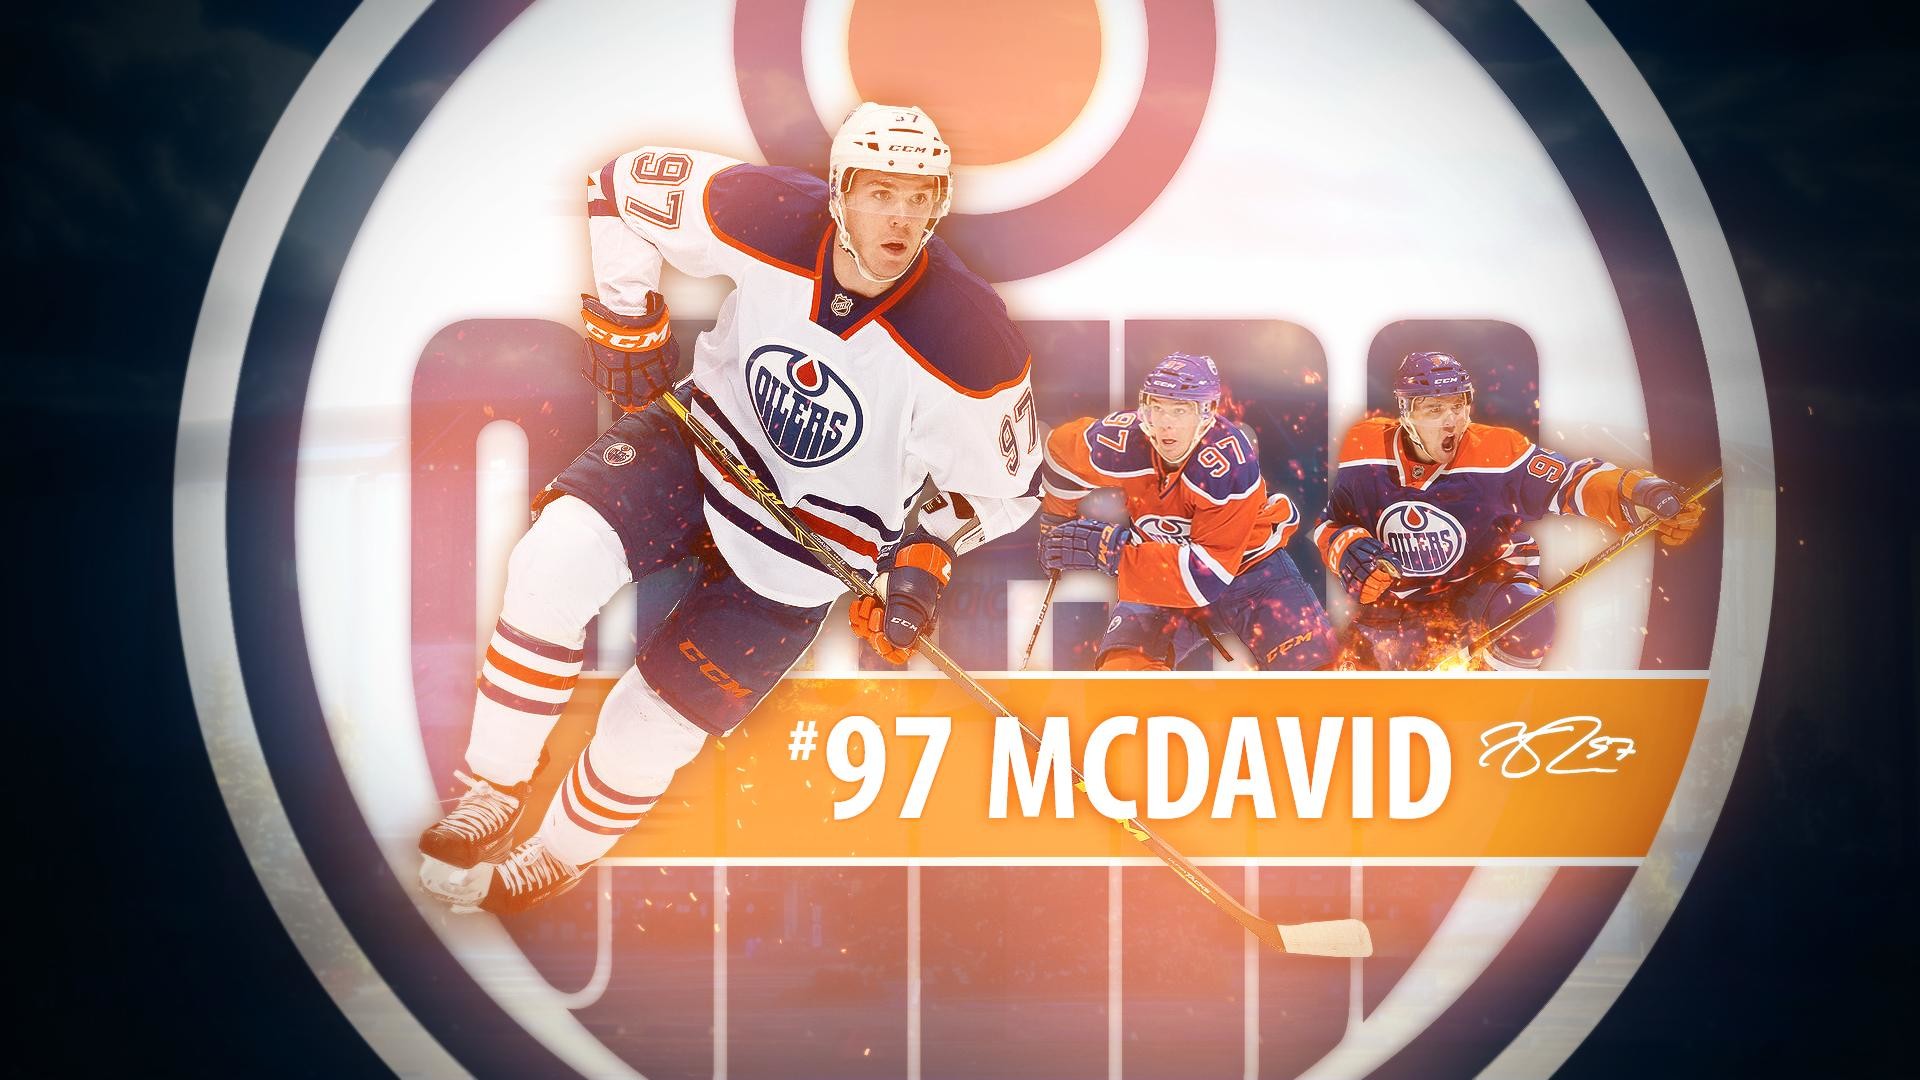 1920x1080 McDavid Wallpaper (as requested) ...